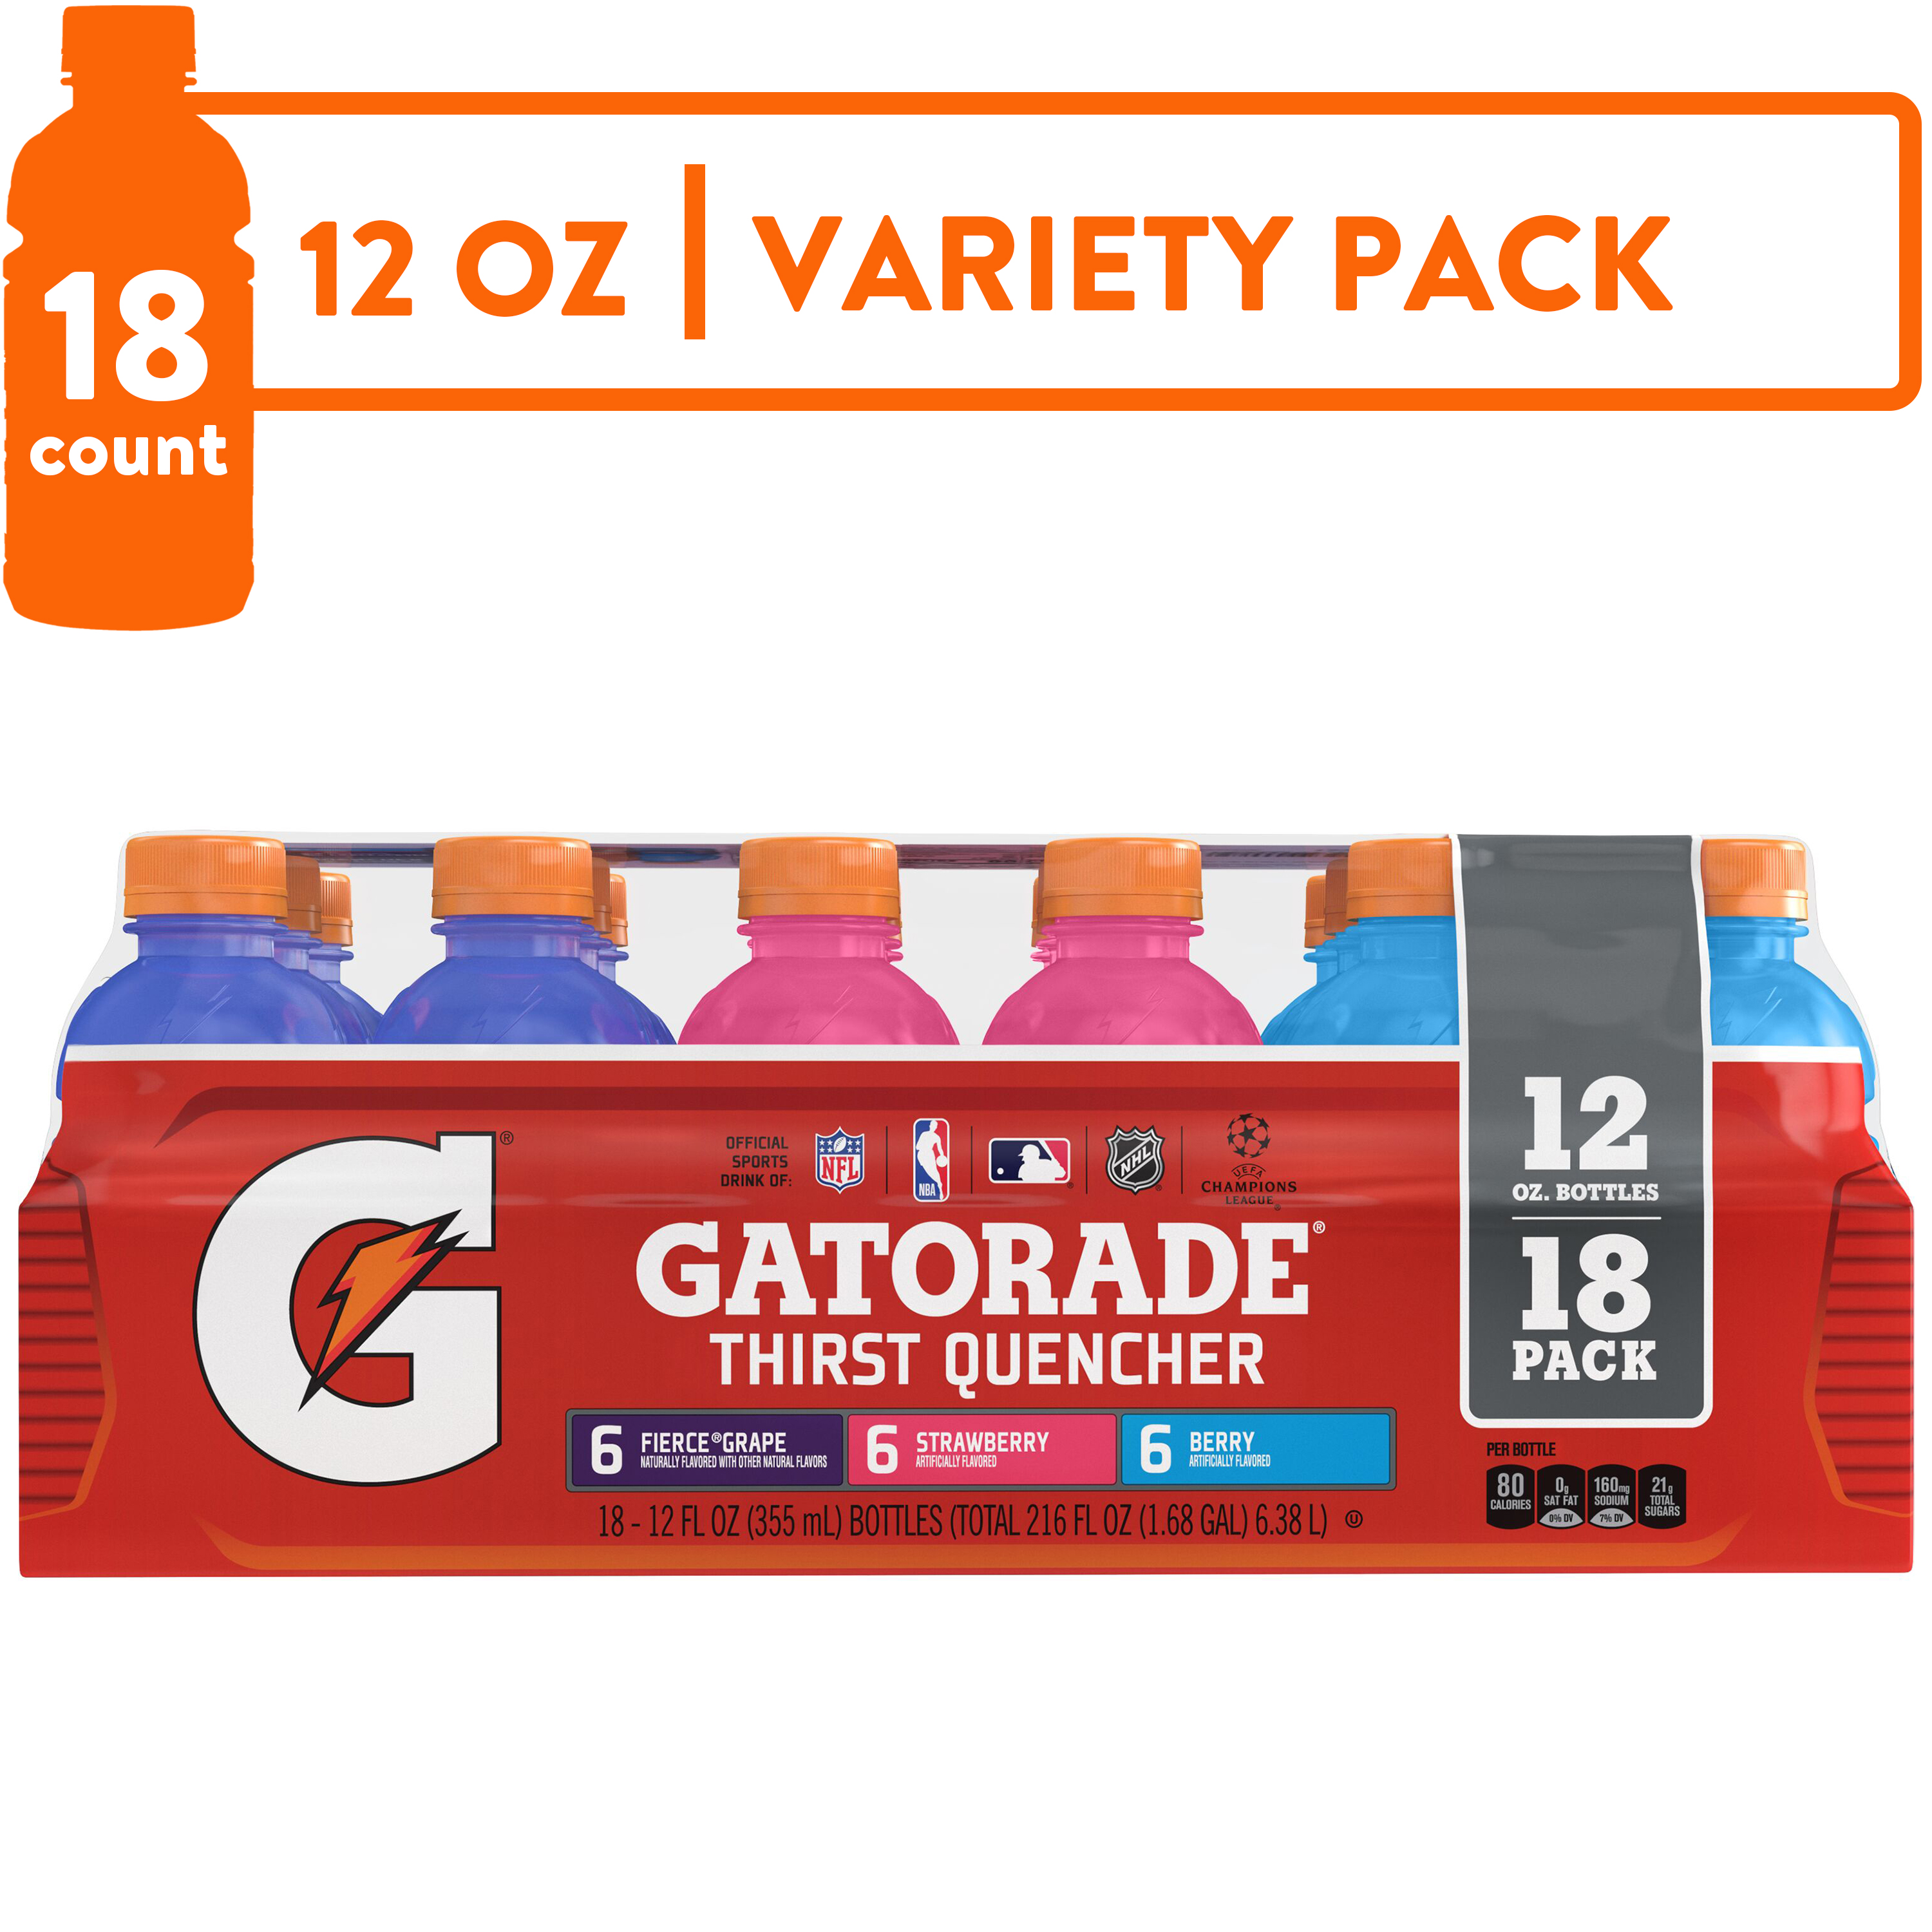 Gatorade Thirst Quencher Variety Pack, Grape/Strawberry/Berry Sports Drinks, 12 fl oz, 18 Ct Bottles - image 1 of 12